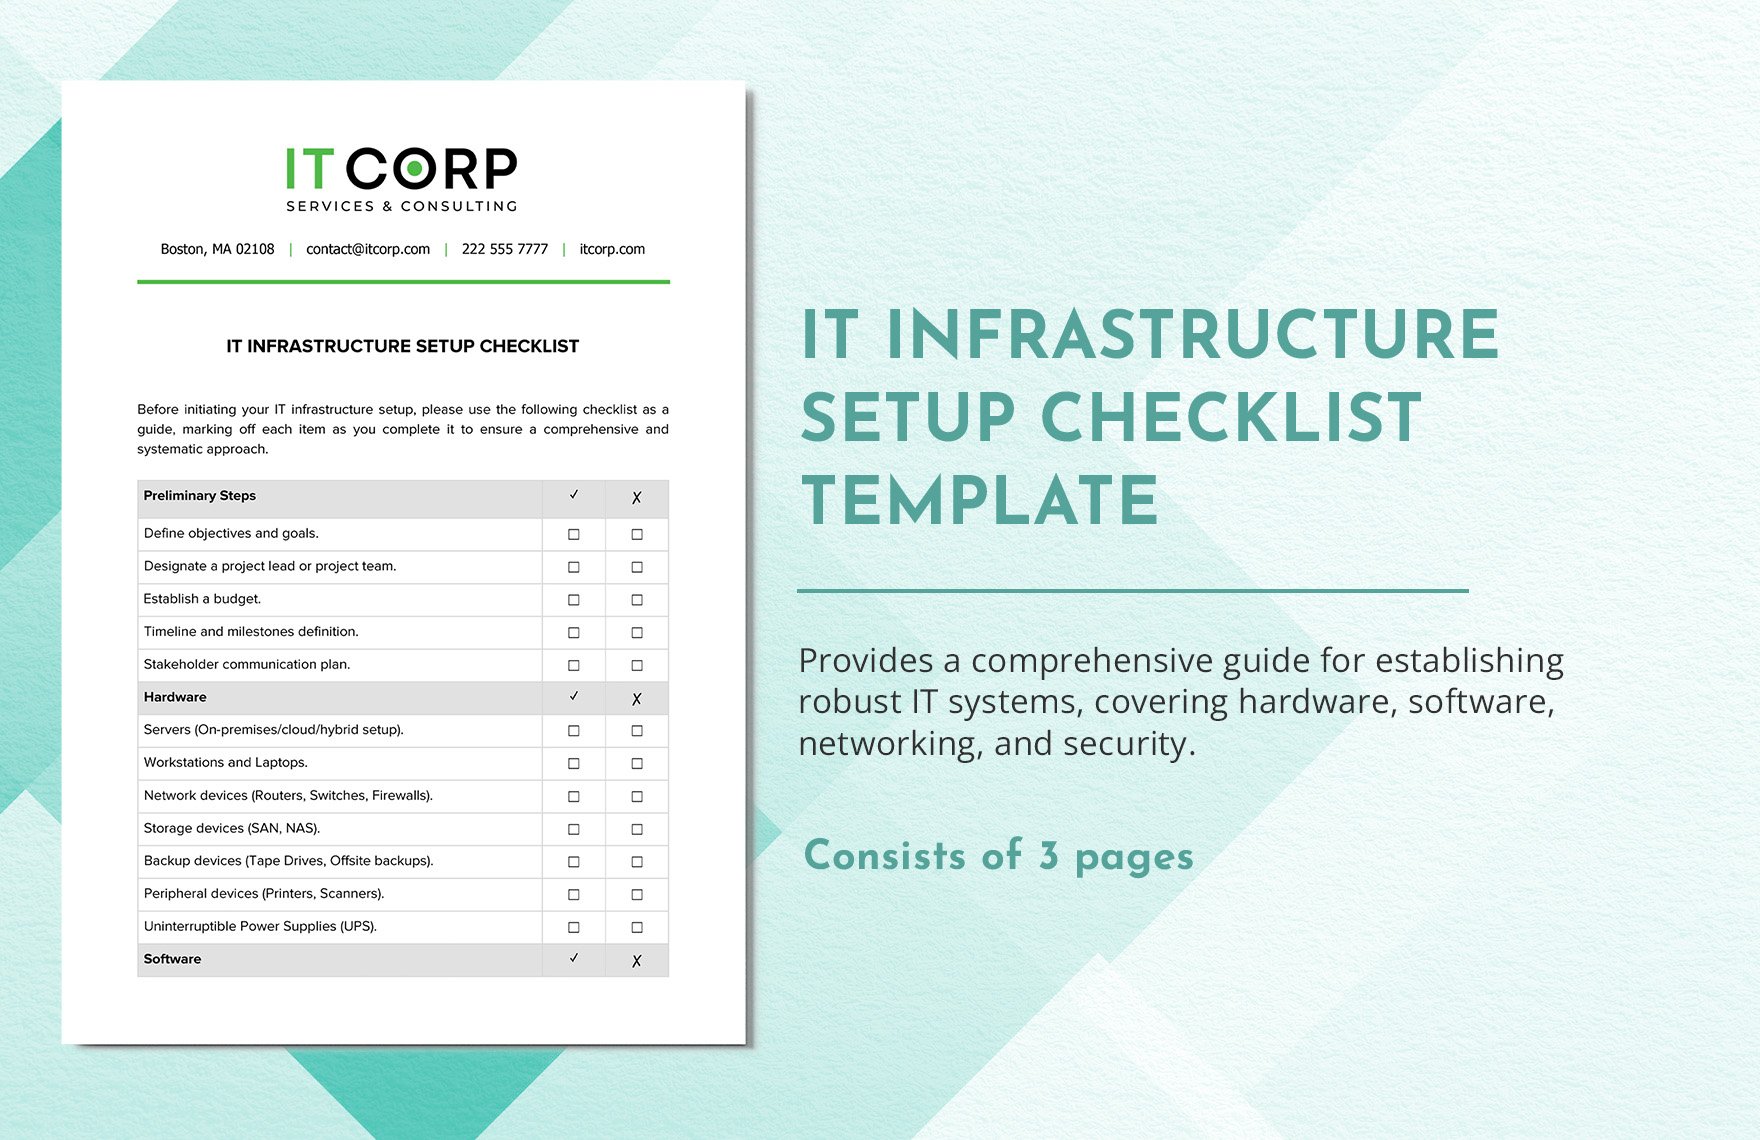 IT Infrastructure Setup Checklist Template in Word, Google Docs, PDF